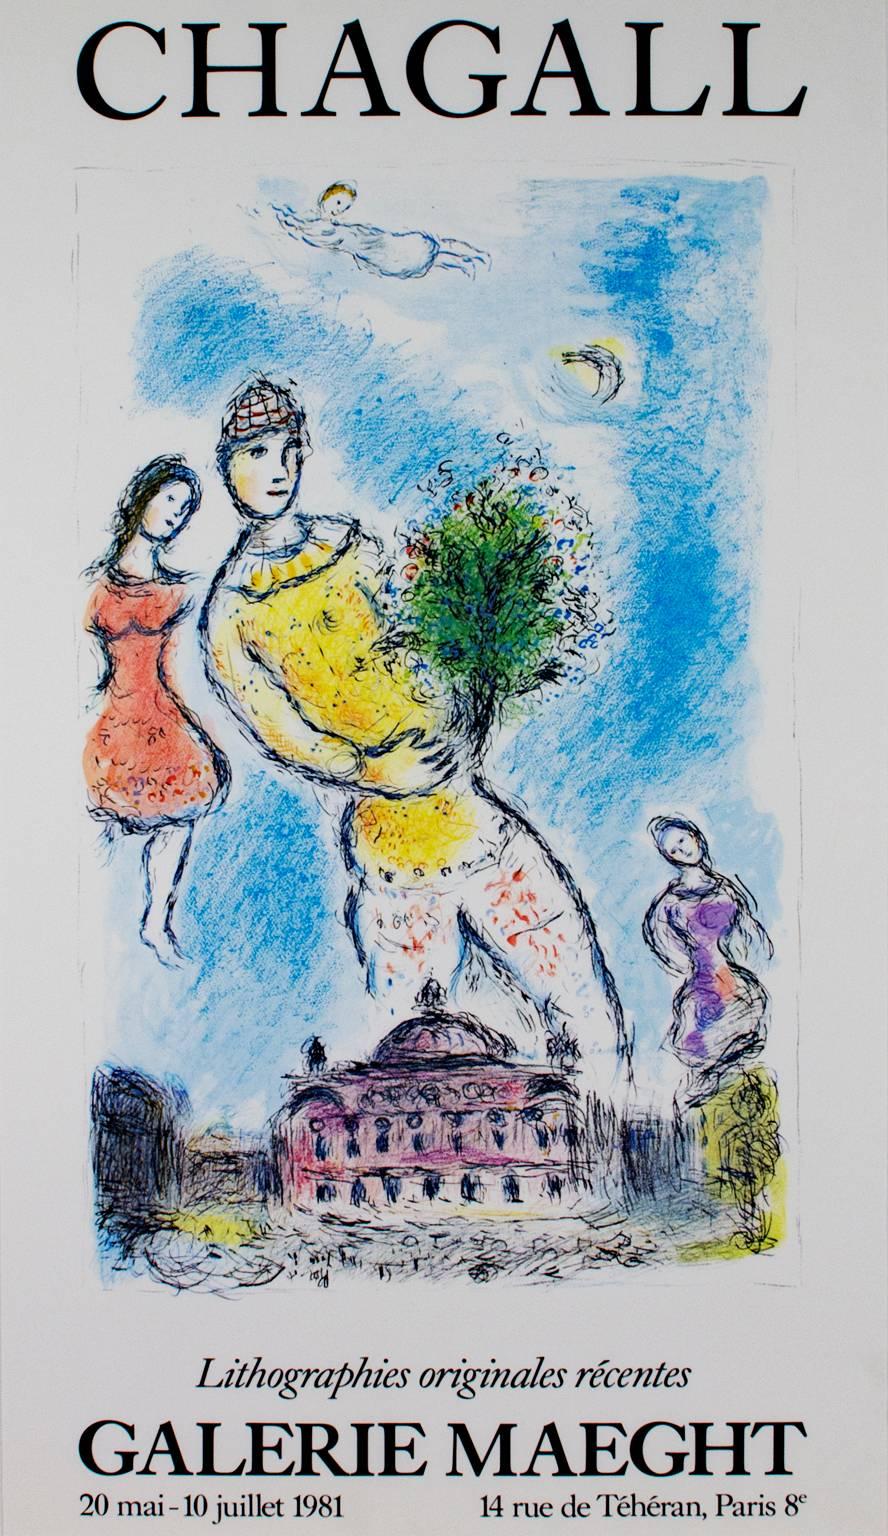 (after) Marc Chagall Figurative Print - "Galerie Maeght, " Offset Lithograph Poster After a Painting by Marc Chagall